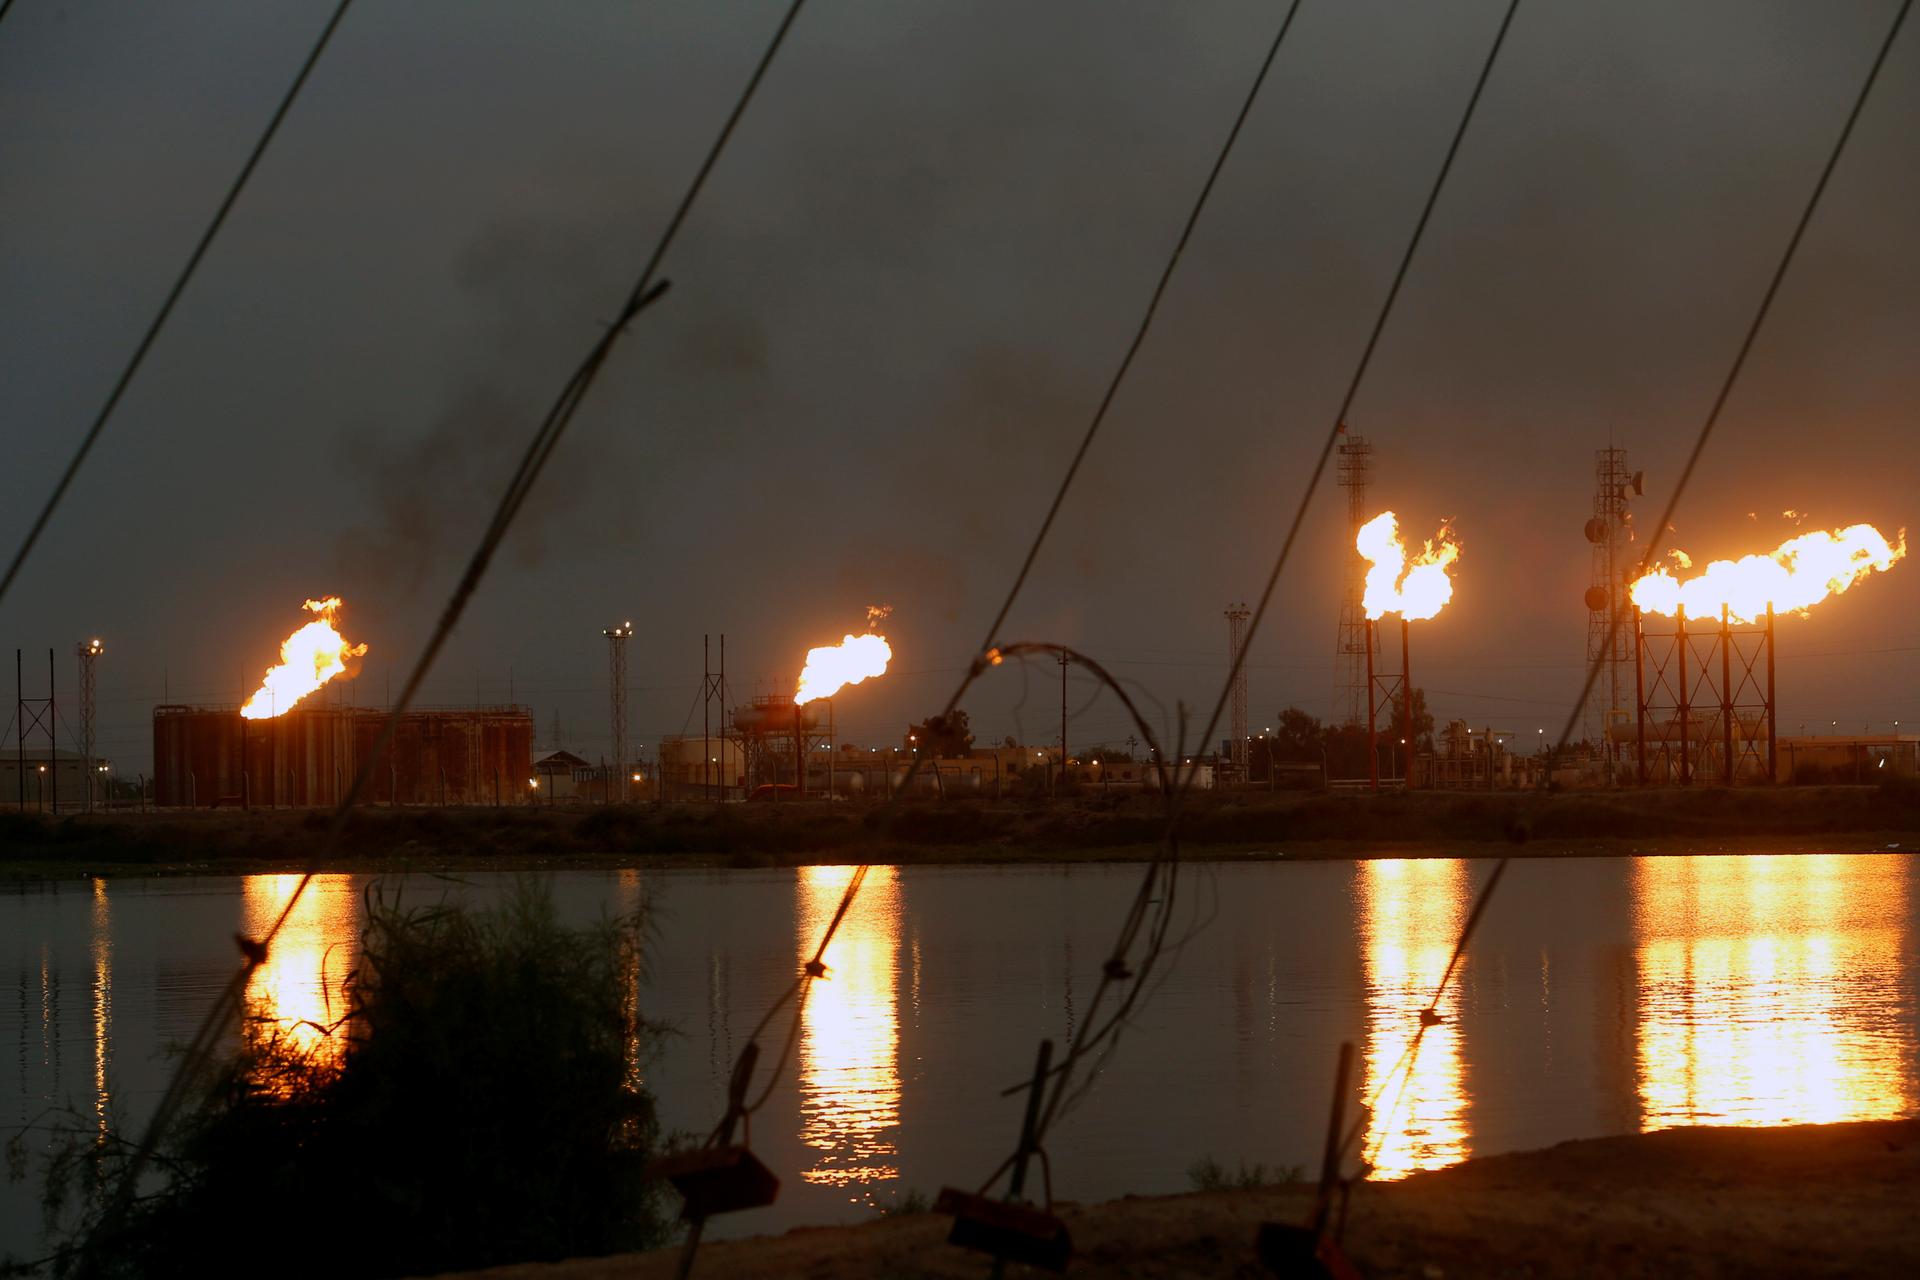 Flames emerge from flare stacks at Nahr Bin Umar oil field, north of Basra, Iraq, on Sept. 16, 2019.